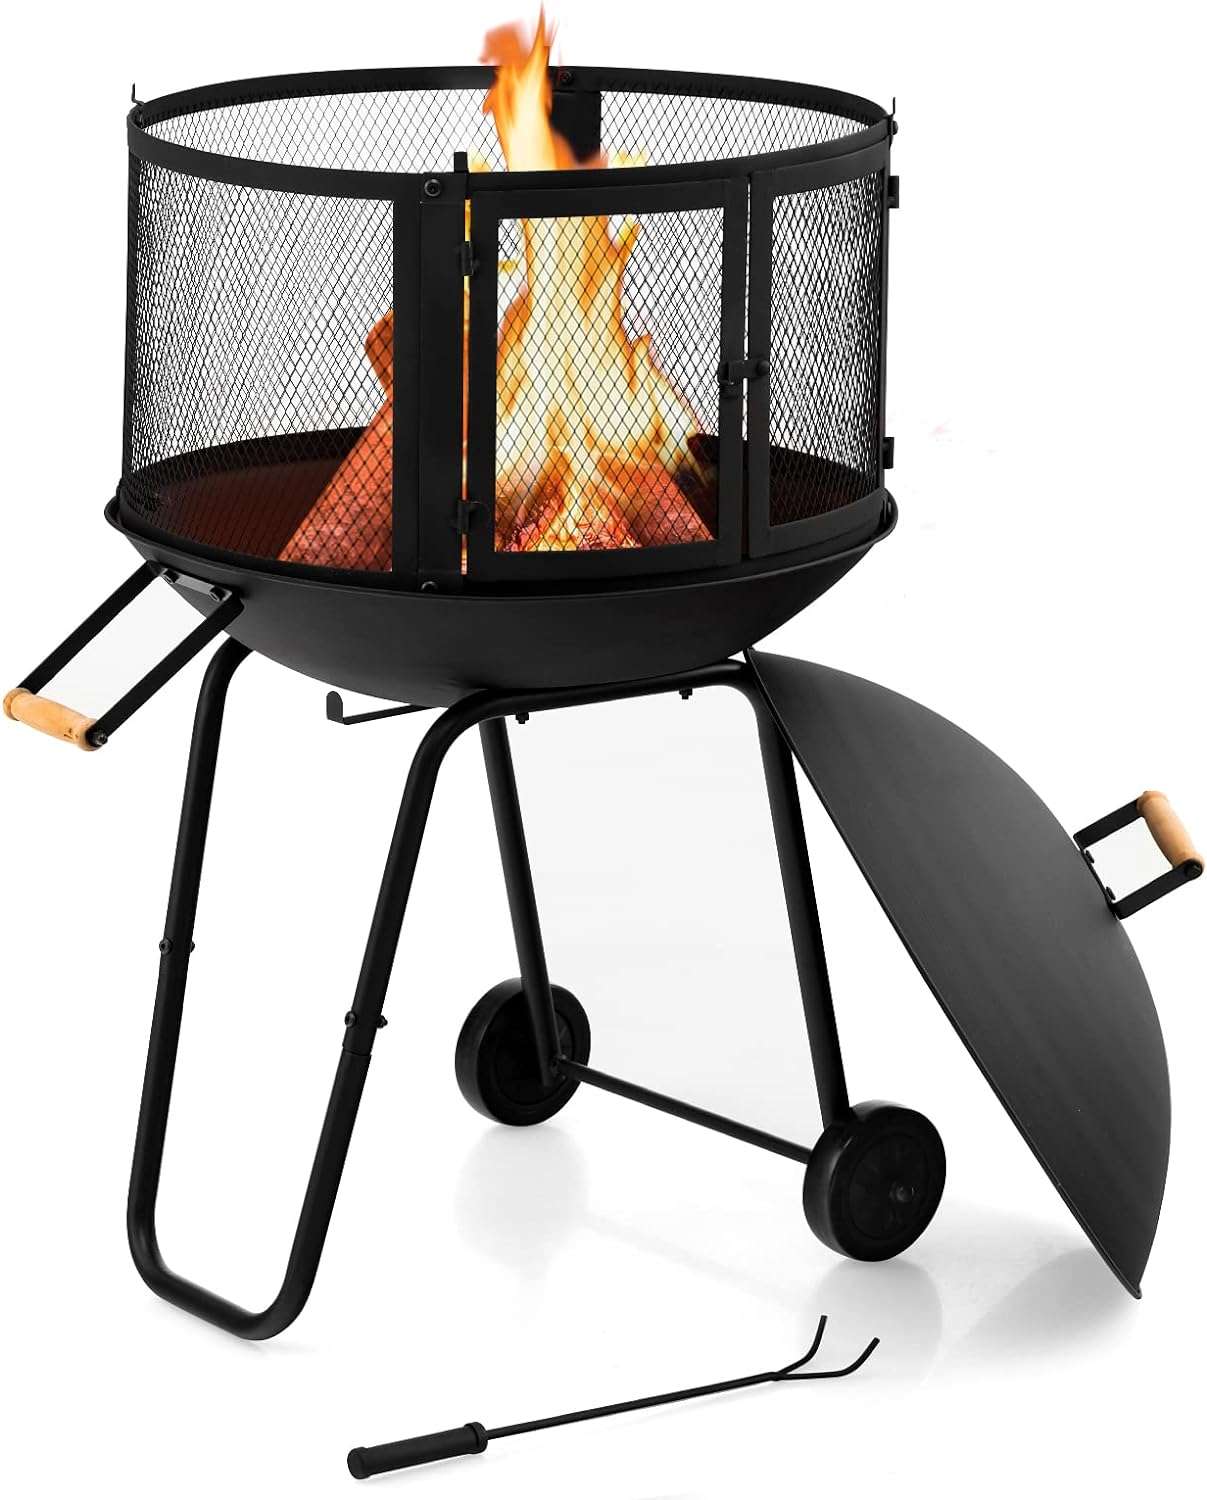 fire pit with wheels outdoor portable